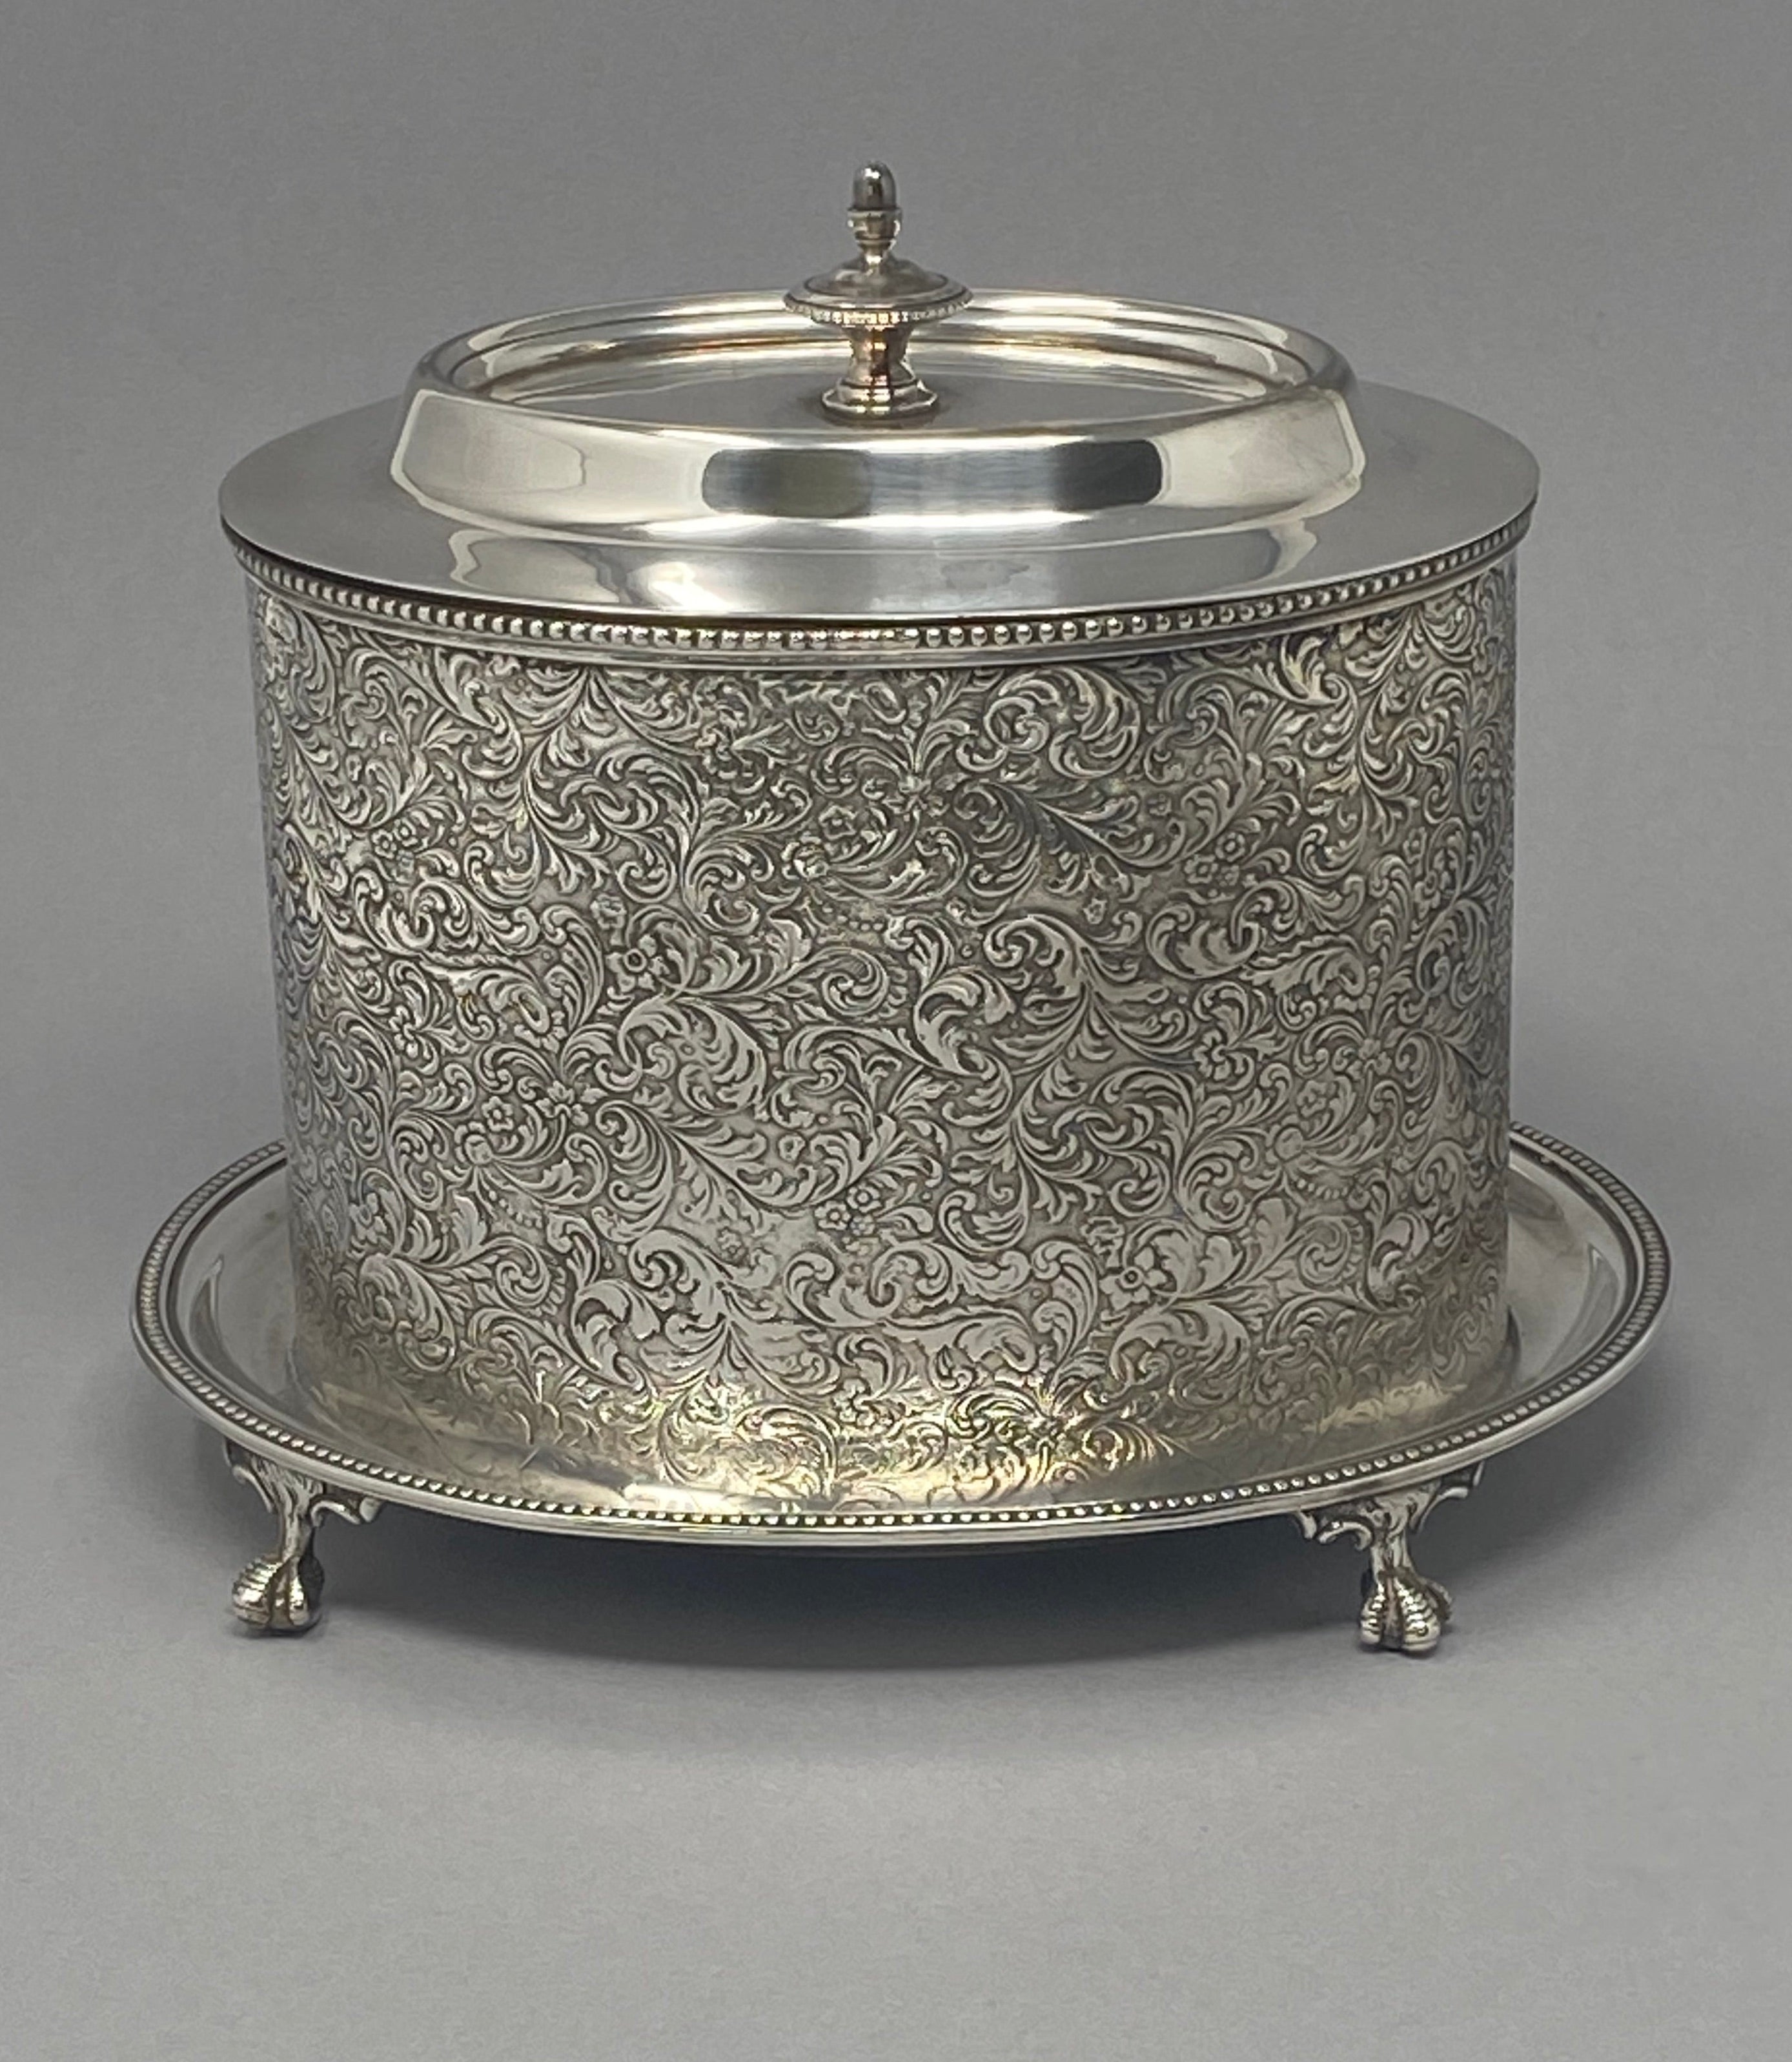 Antique Silver Plated Oval Biscuit Box